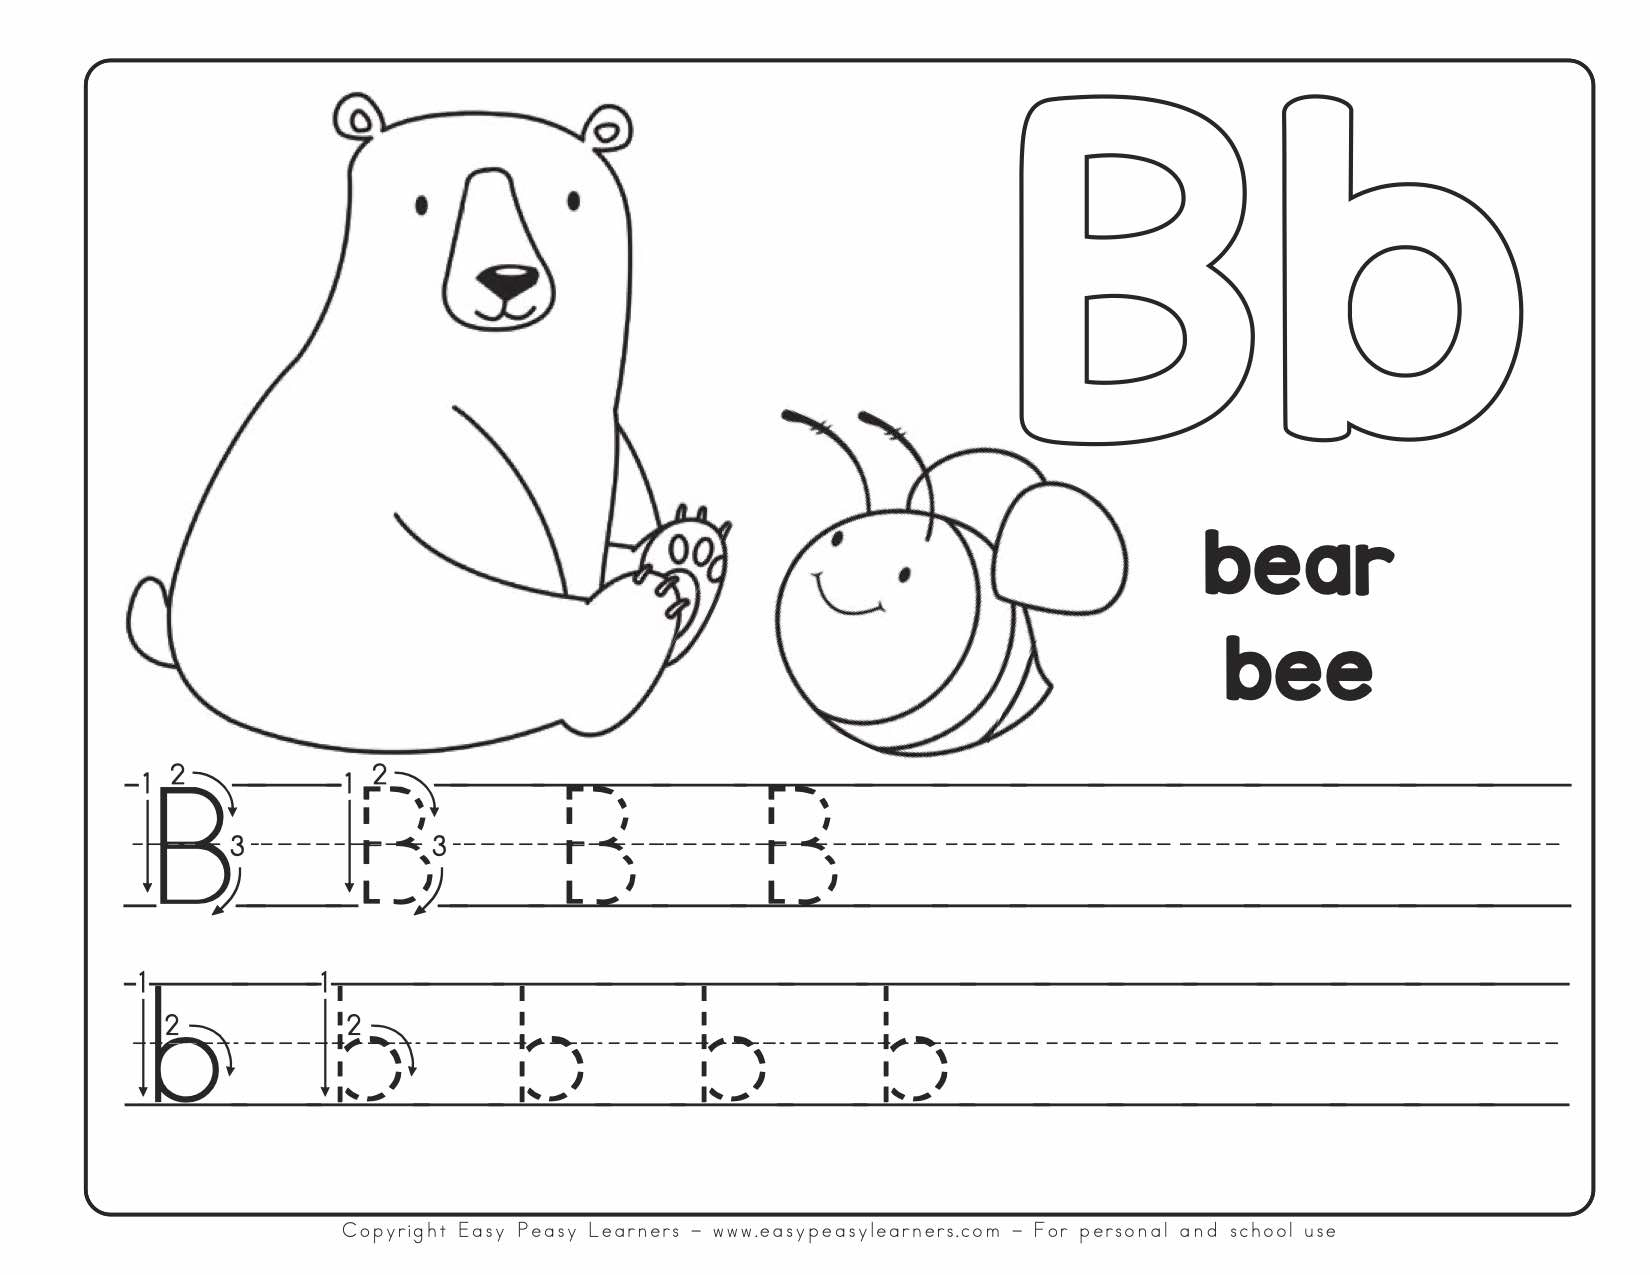 Free Printable Alphabet Book - Alphabet Worksheets For Pre-K And K intended for Free Printable Alphabet Worksheets For Kindergarten